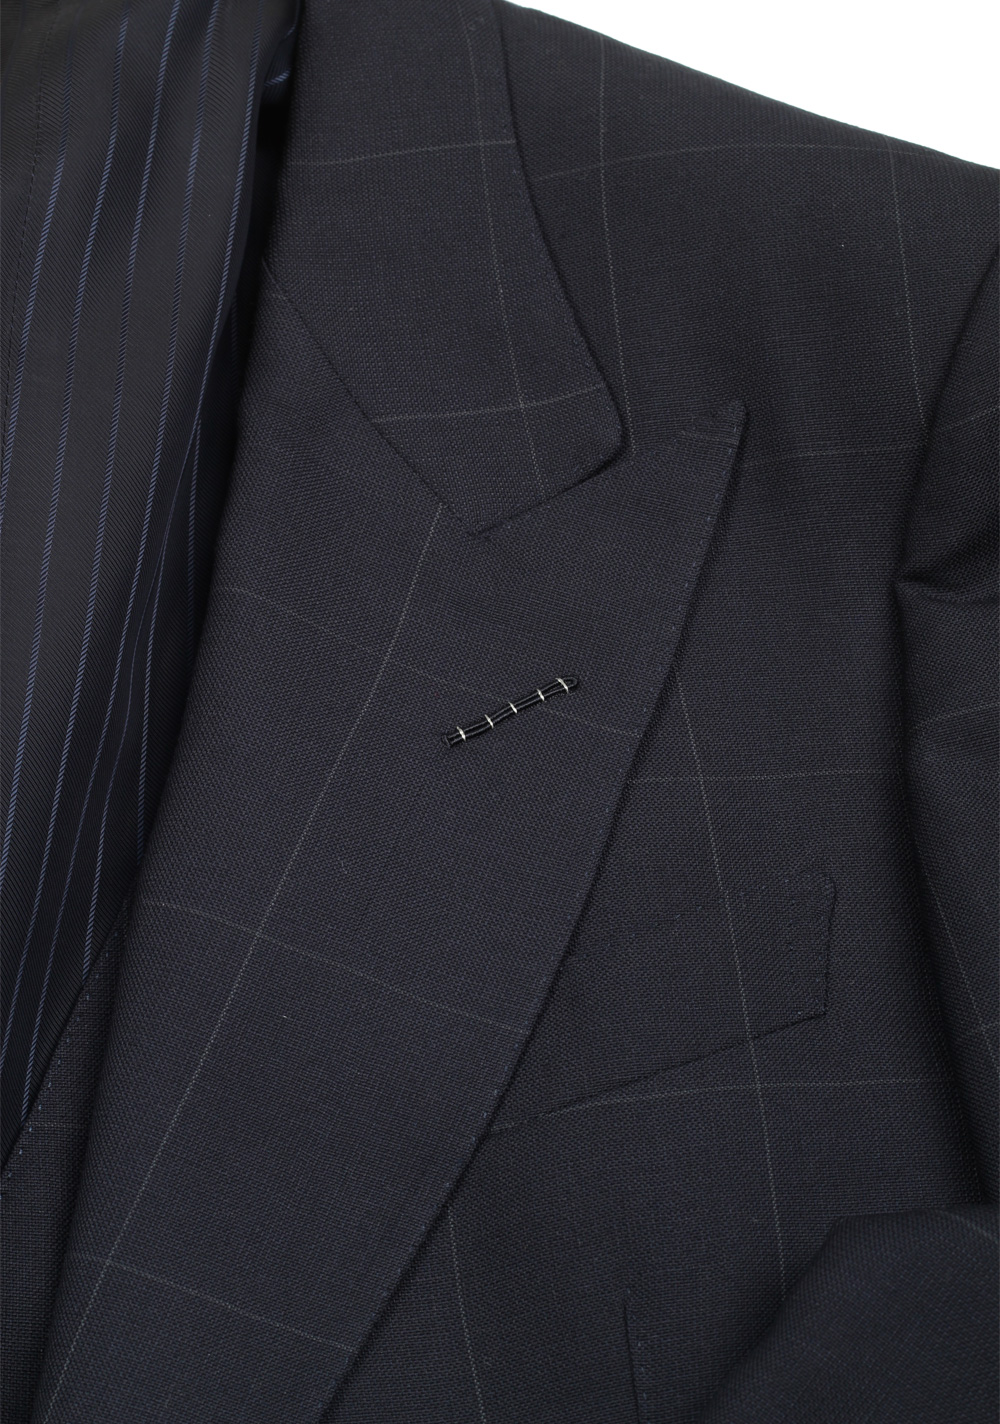 TOM FORD Shelton Checked Blue 3 Piece Suit Size 48C / 38S U.S. In Wool Mohair | Costume Limité